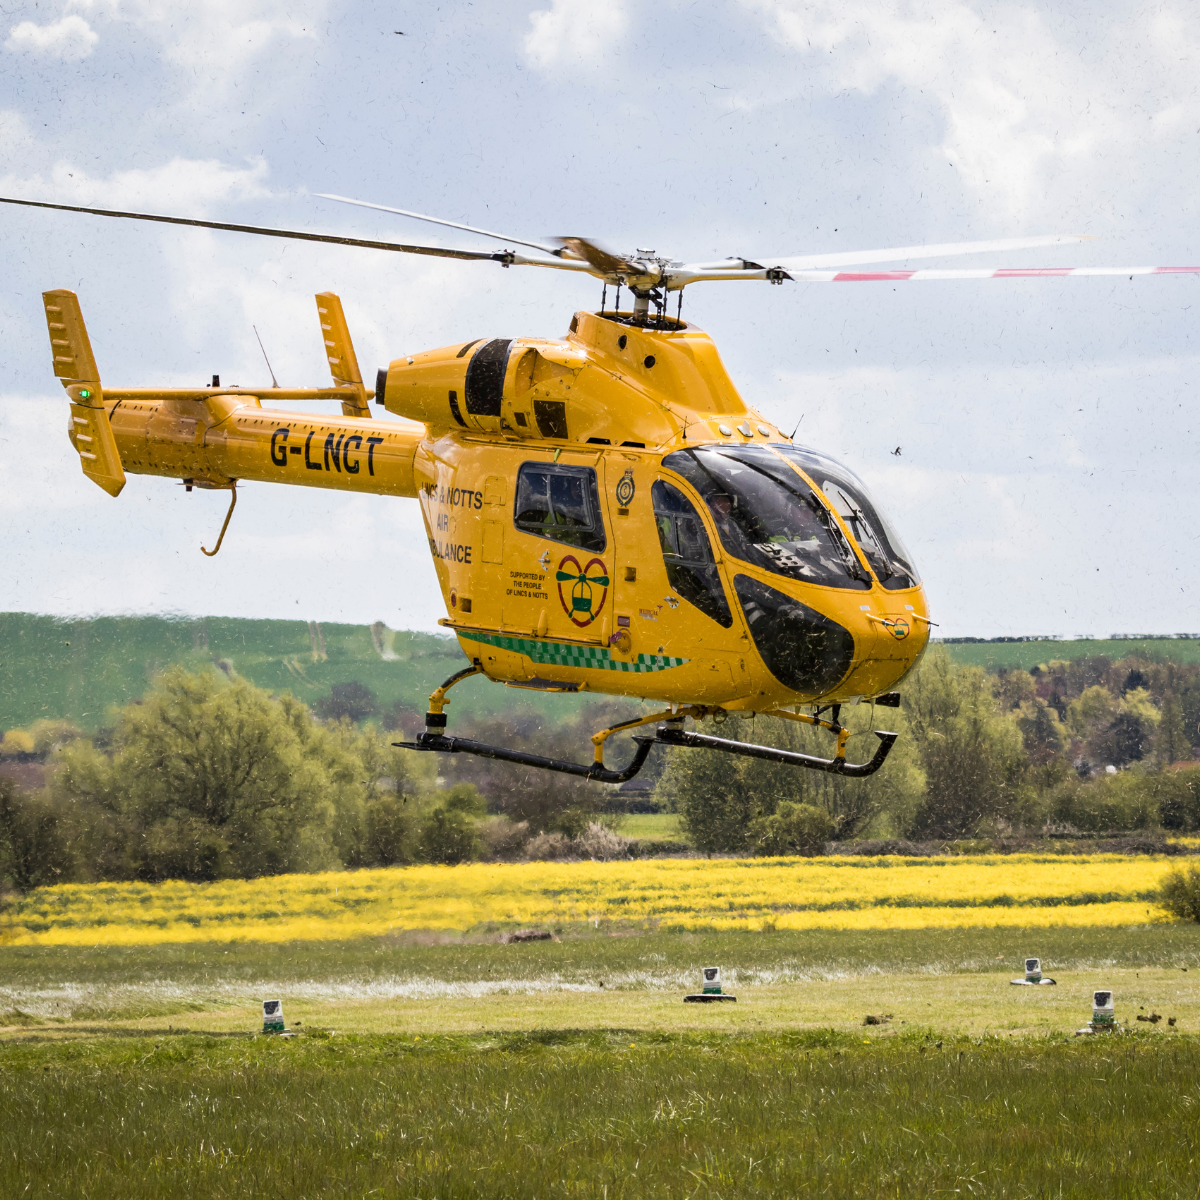 Our history archive showing G-LNCT helicopter taking off